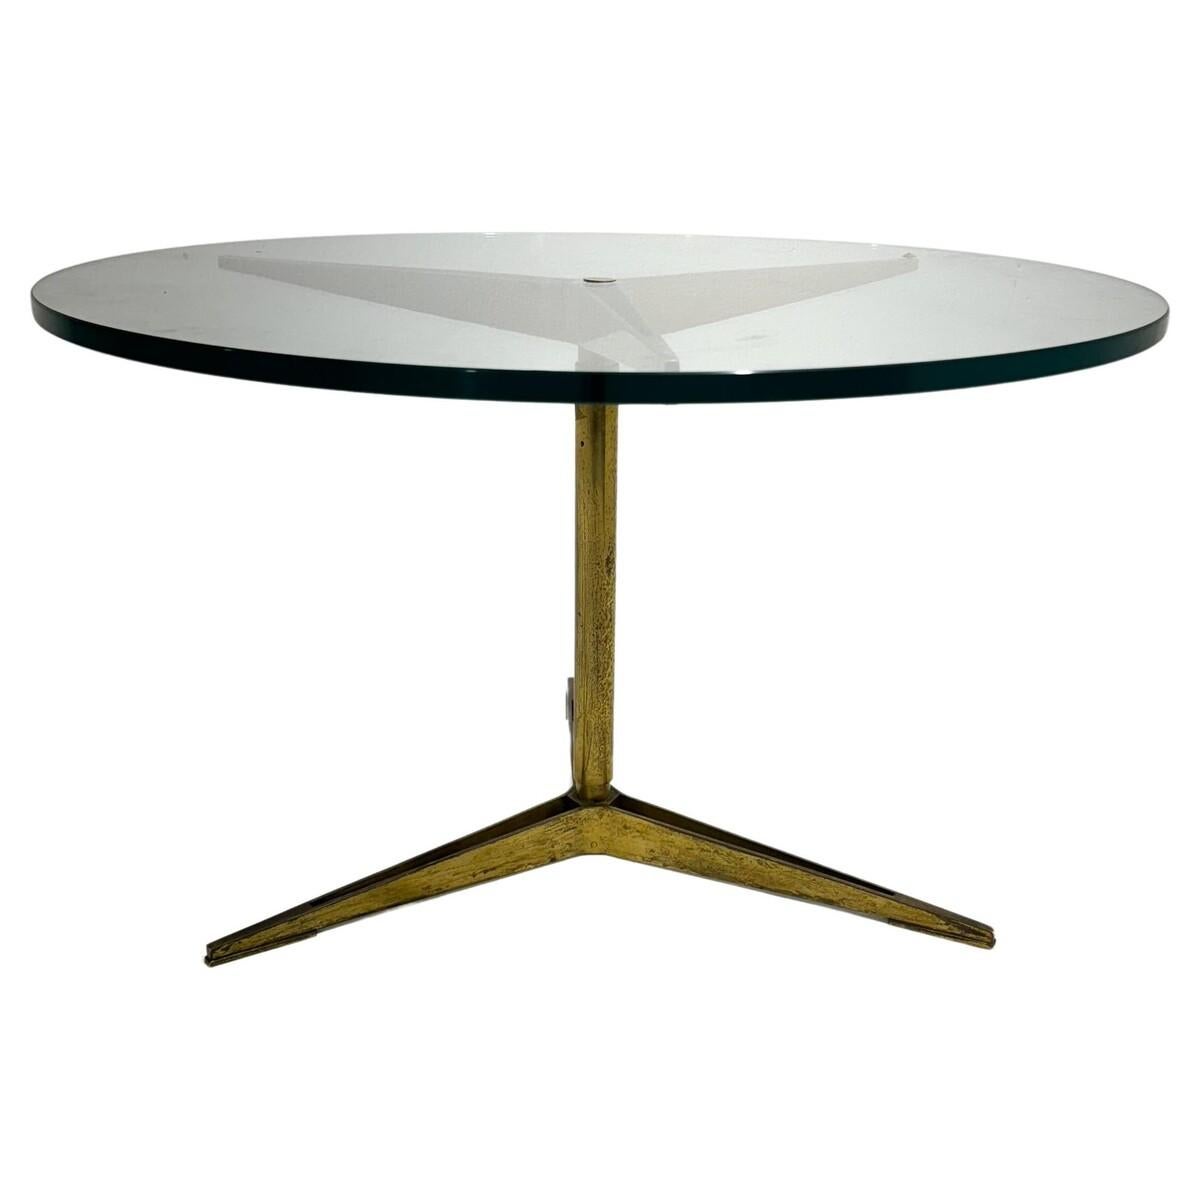 Brass Mid-Century Modern Side Table 1128 by Gio Ponti, Singer and Sons, 1950s